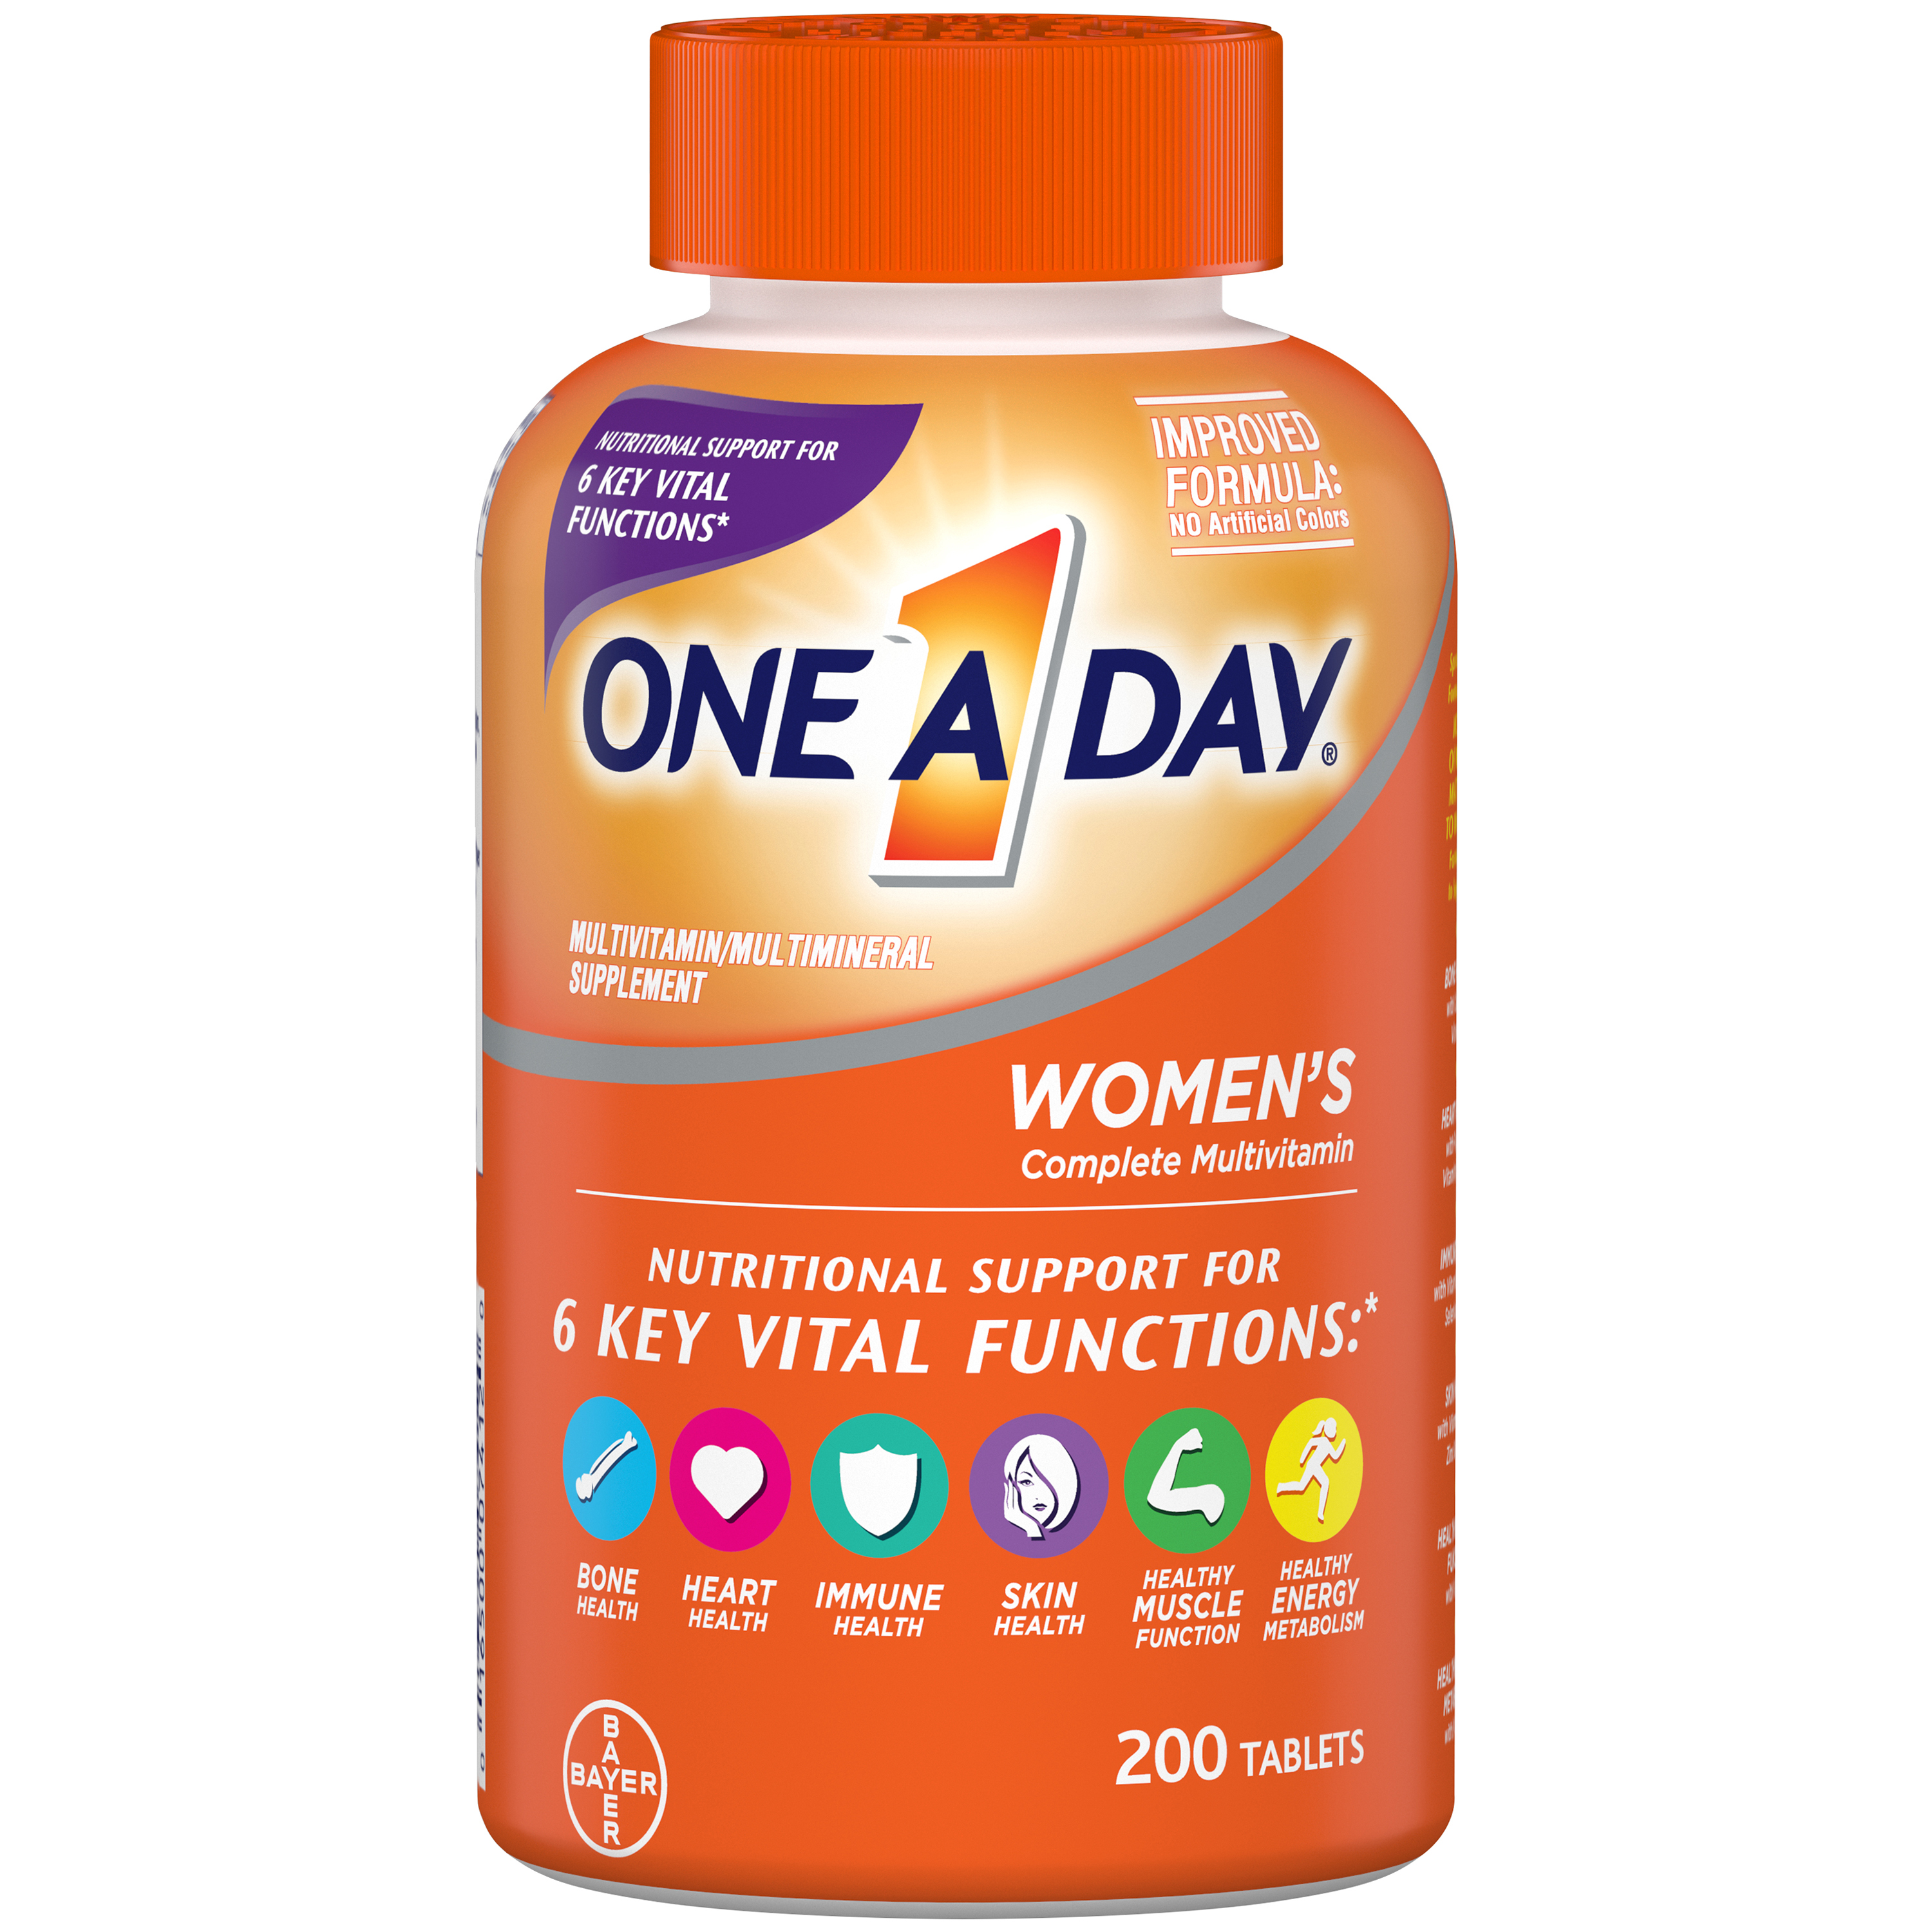 OAD Womens Tablets 200ct - image 1 of 4